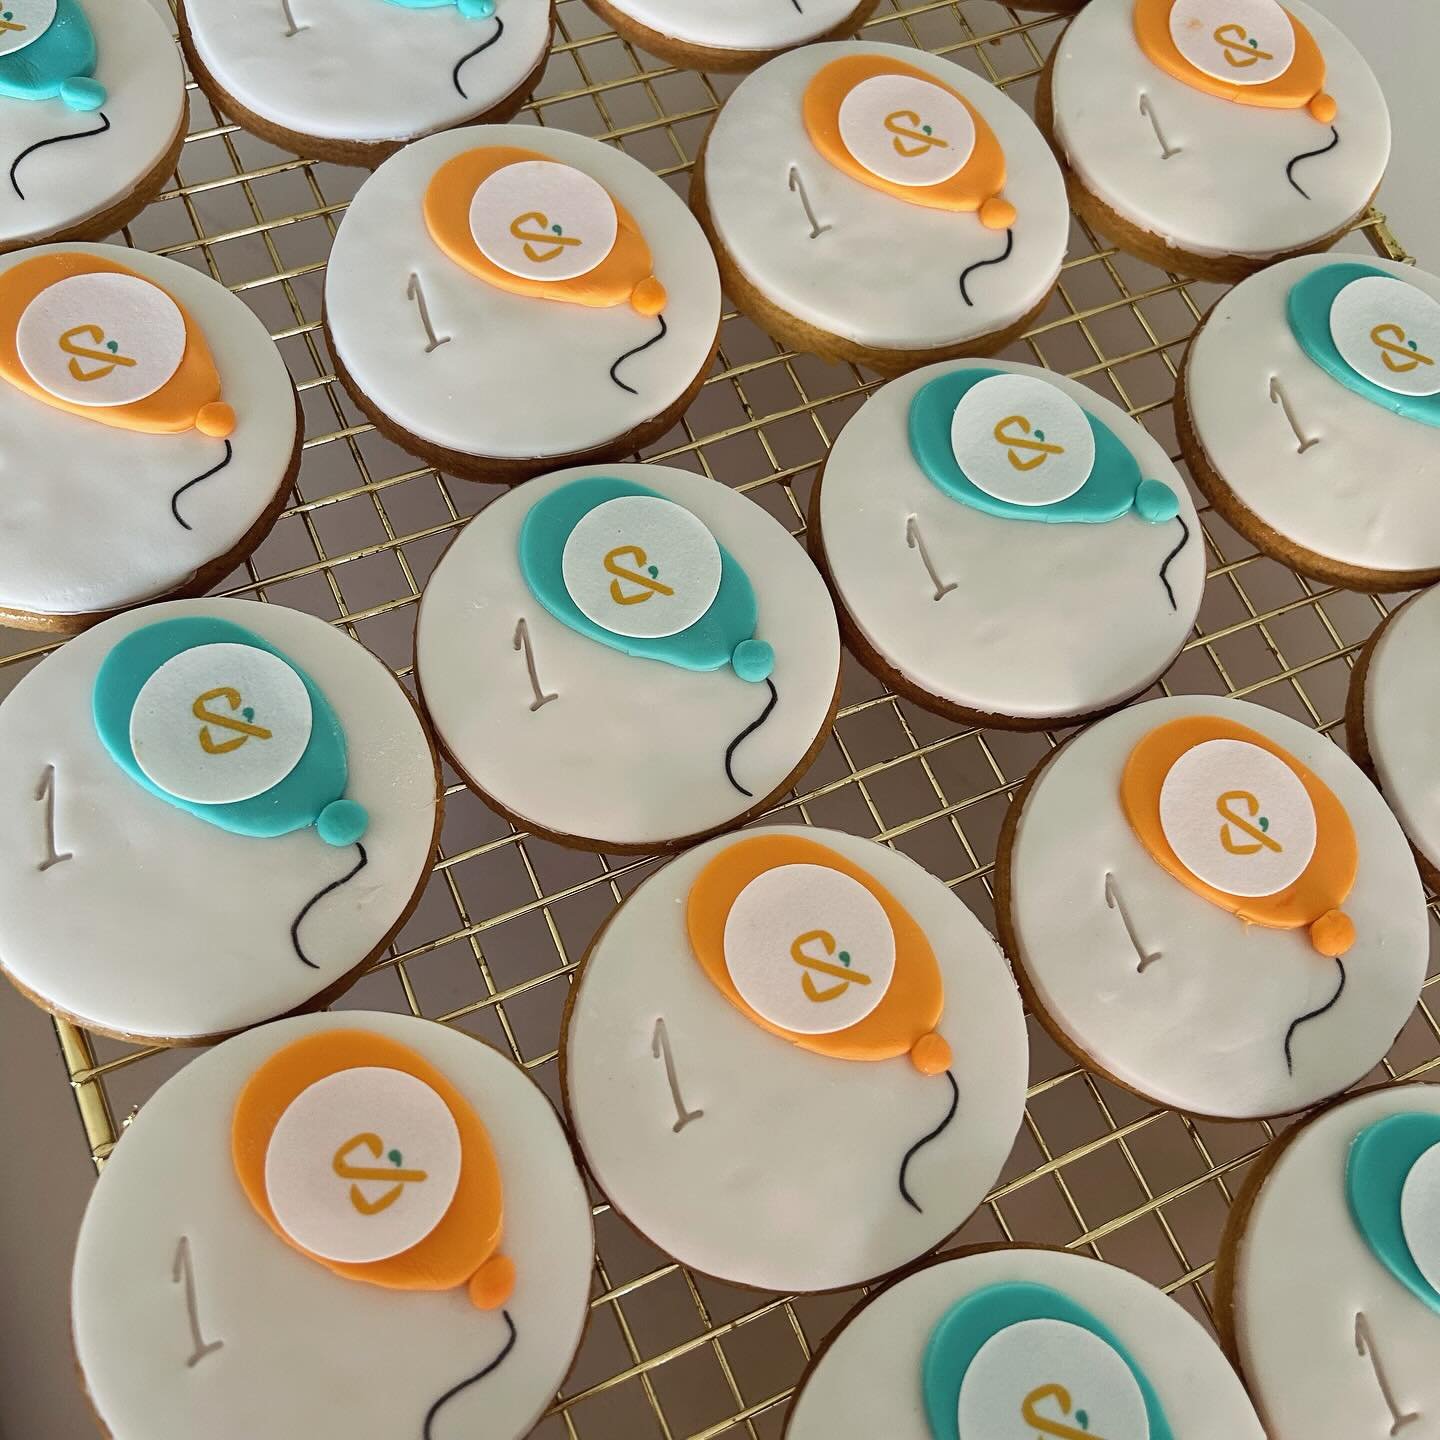 1st Birthday Cookies for @sharpandcarter! Congratulations on such a successful first year 👏👏👏 #recruitment #perthrecruitment #corporatesugarcookies #corporatesugarcookiesperth #sugarcookiesperth #sugarcookies #acdn #acdnmember #smallbusinesswa